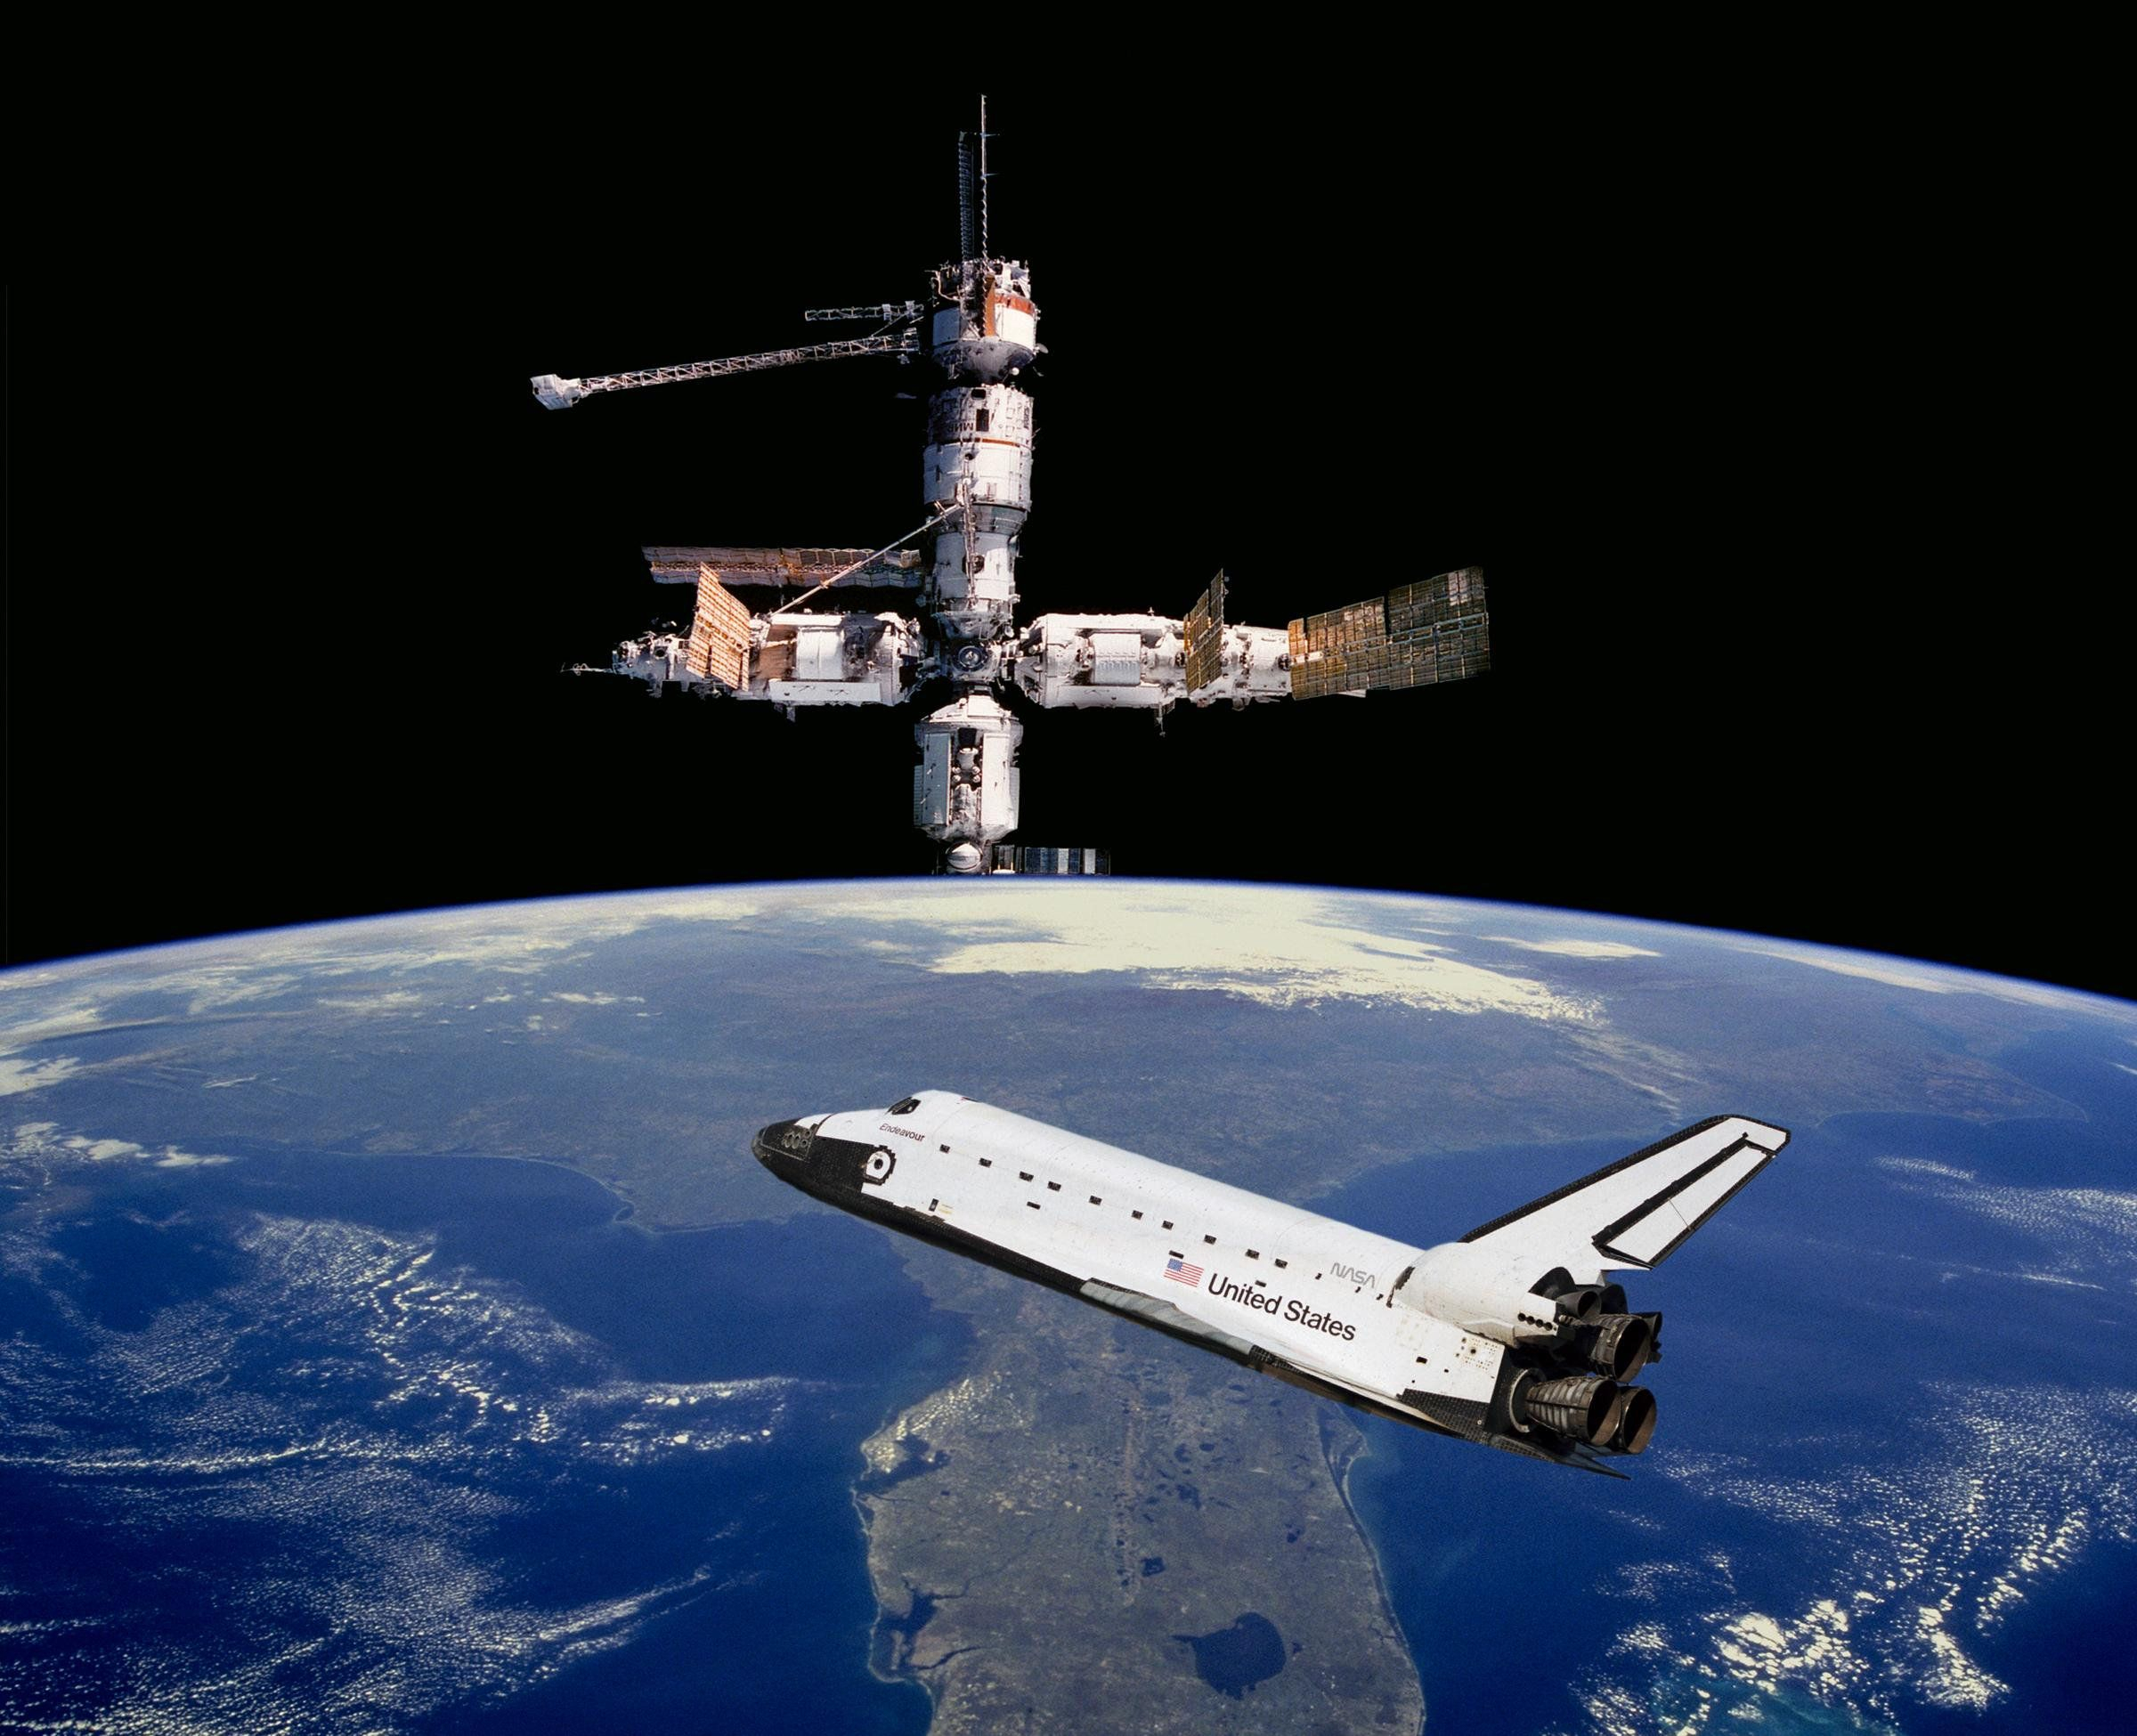 2400x1950 Space shuttle and ISS | Space shuttle, Nasa space shuttle, Space nasa